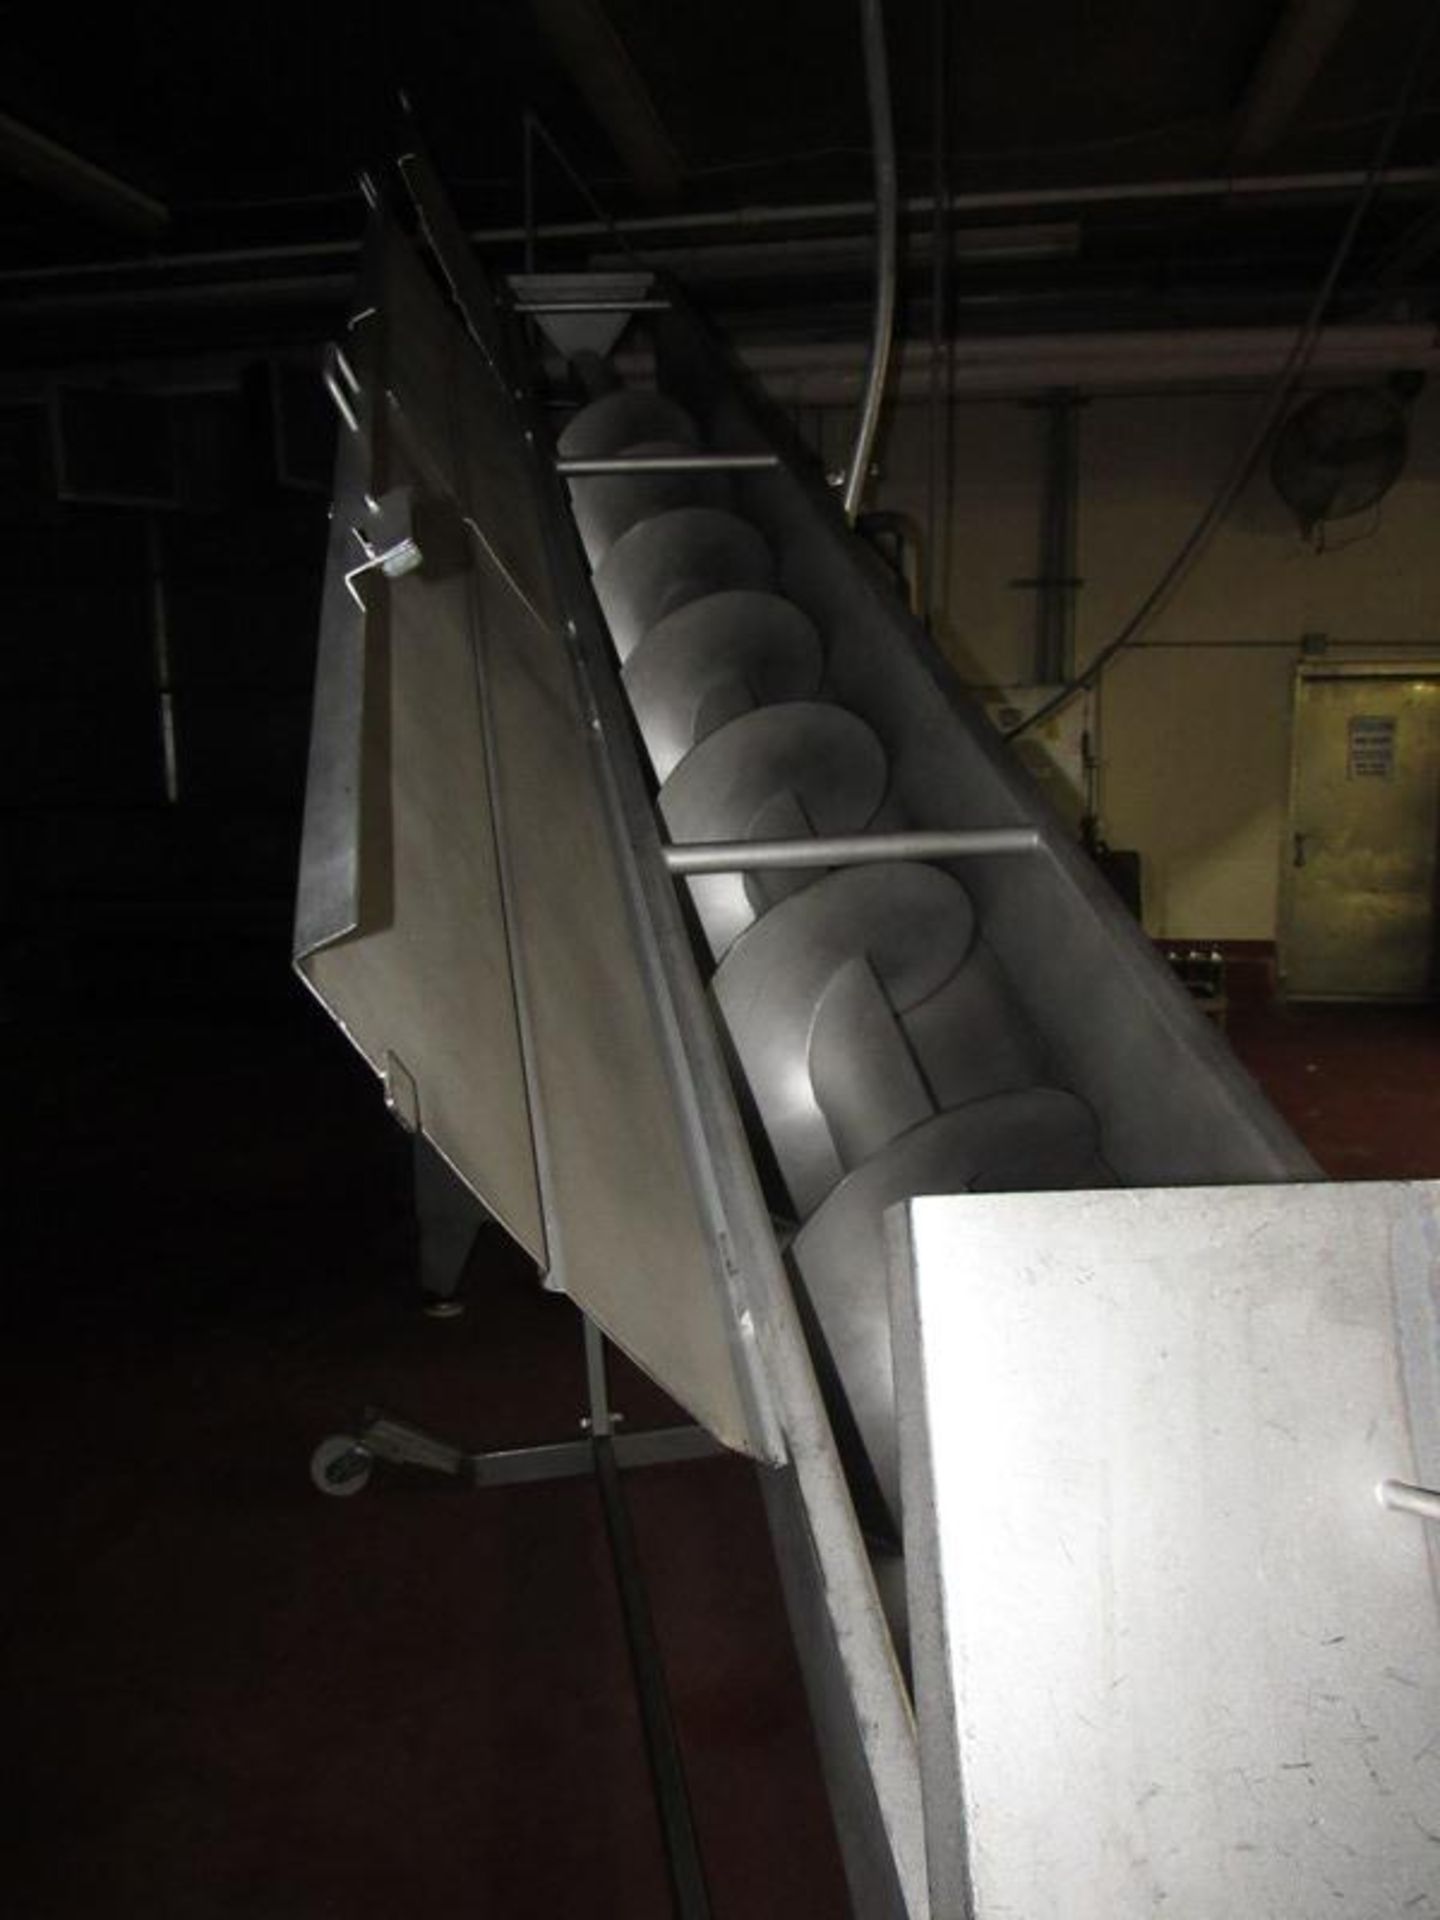 Wolfking Portable Stainless Steel Screw Conveyor, 16" Dia. X 14' Long screw, 24" W X 26" L hopper, - Image 4 of 5